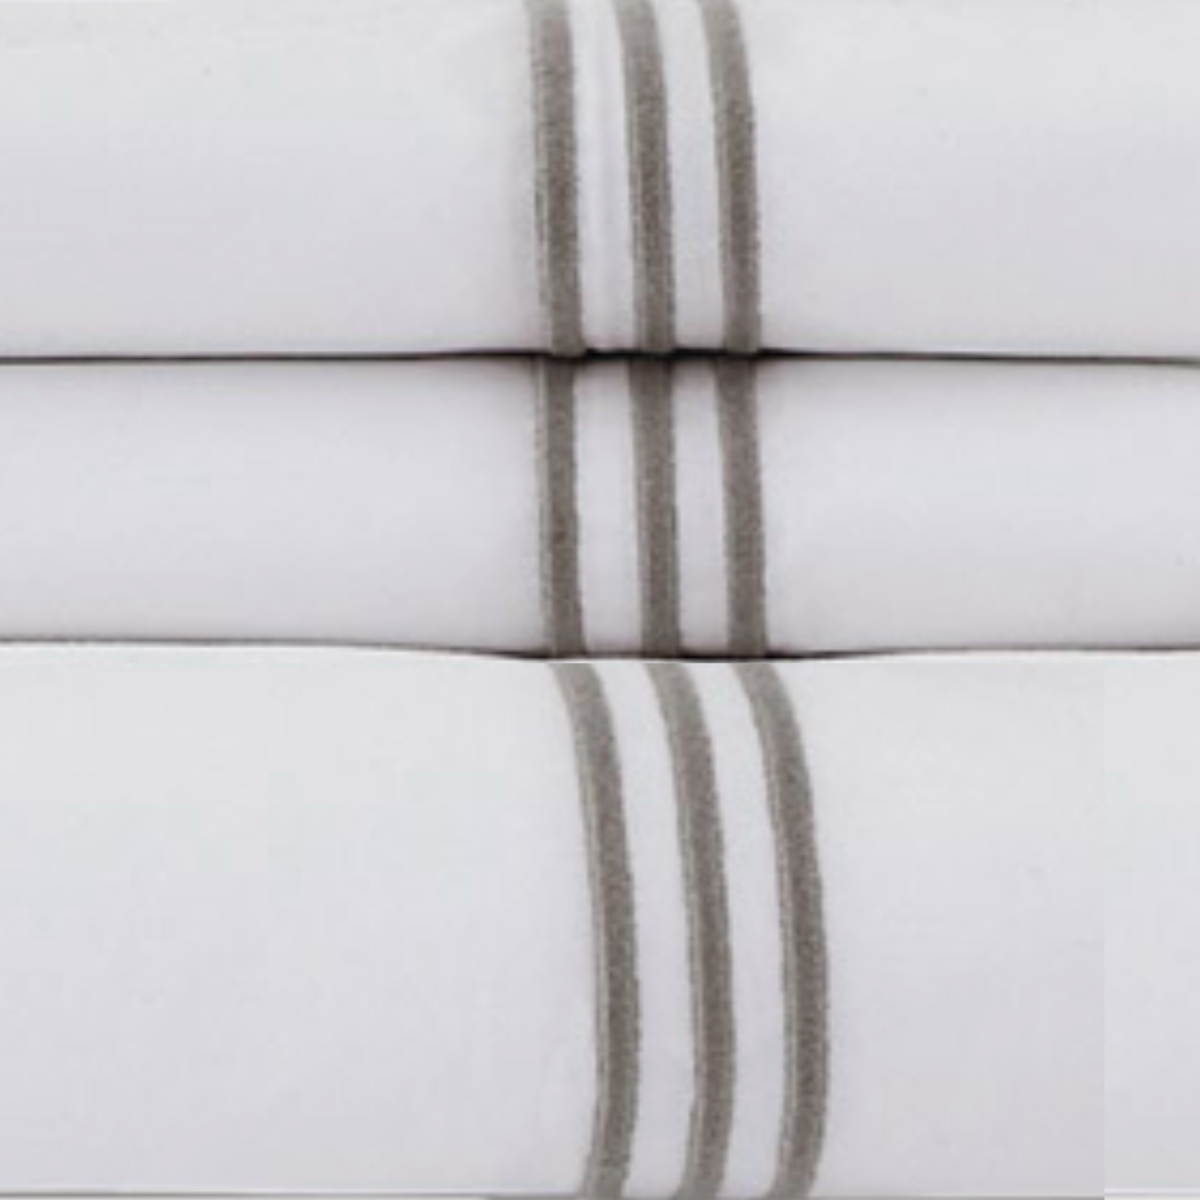 Swatch Sample of Downtown Company Madison Bedding Collection in Gray Color